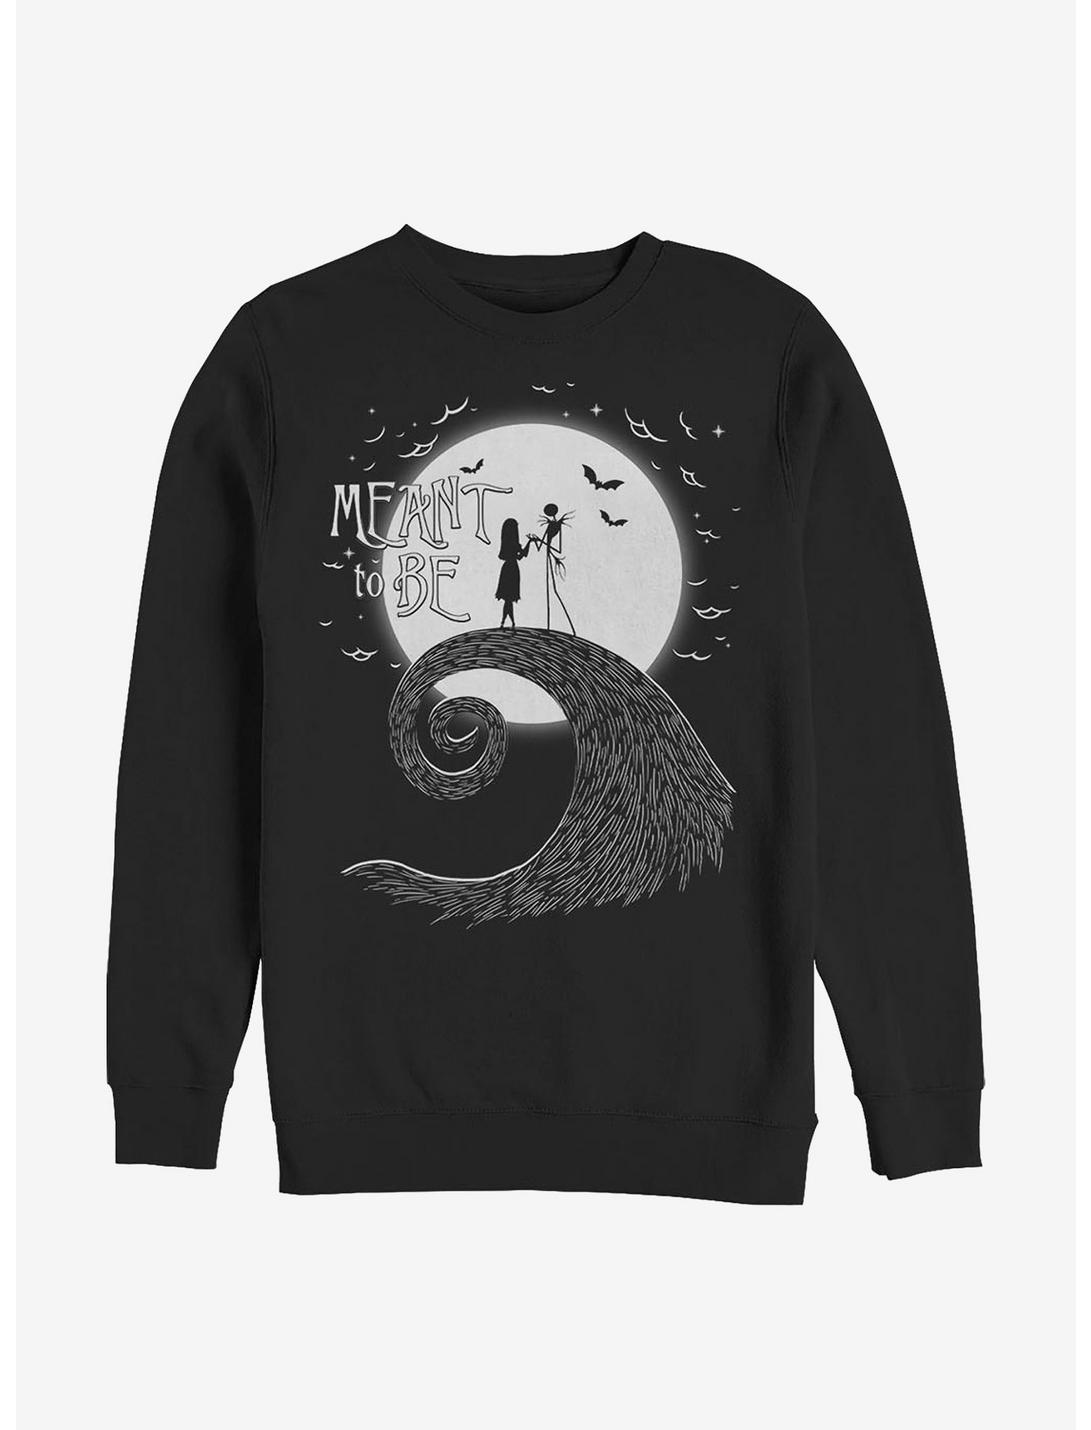 The Nightmare Before Christmas Jack & Sally Meant To Be Sweatshirt, BLACK, hi-res